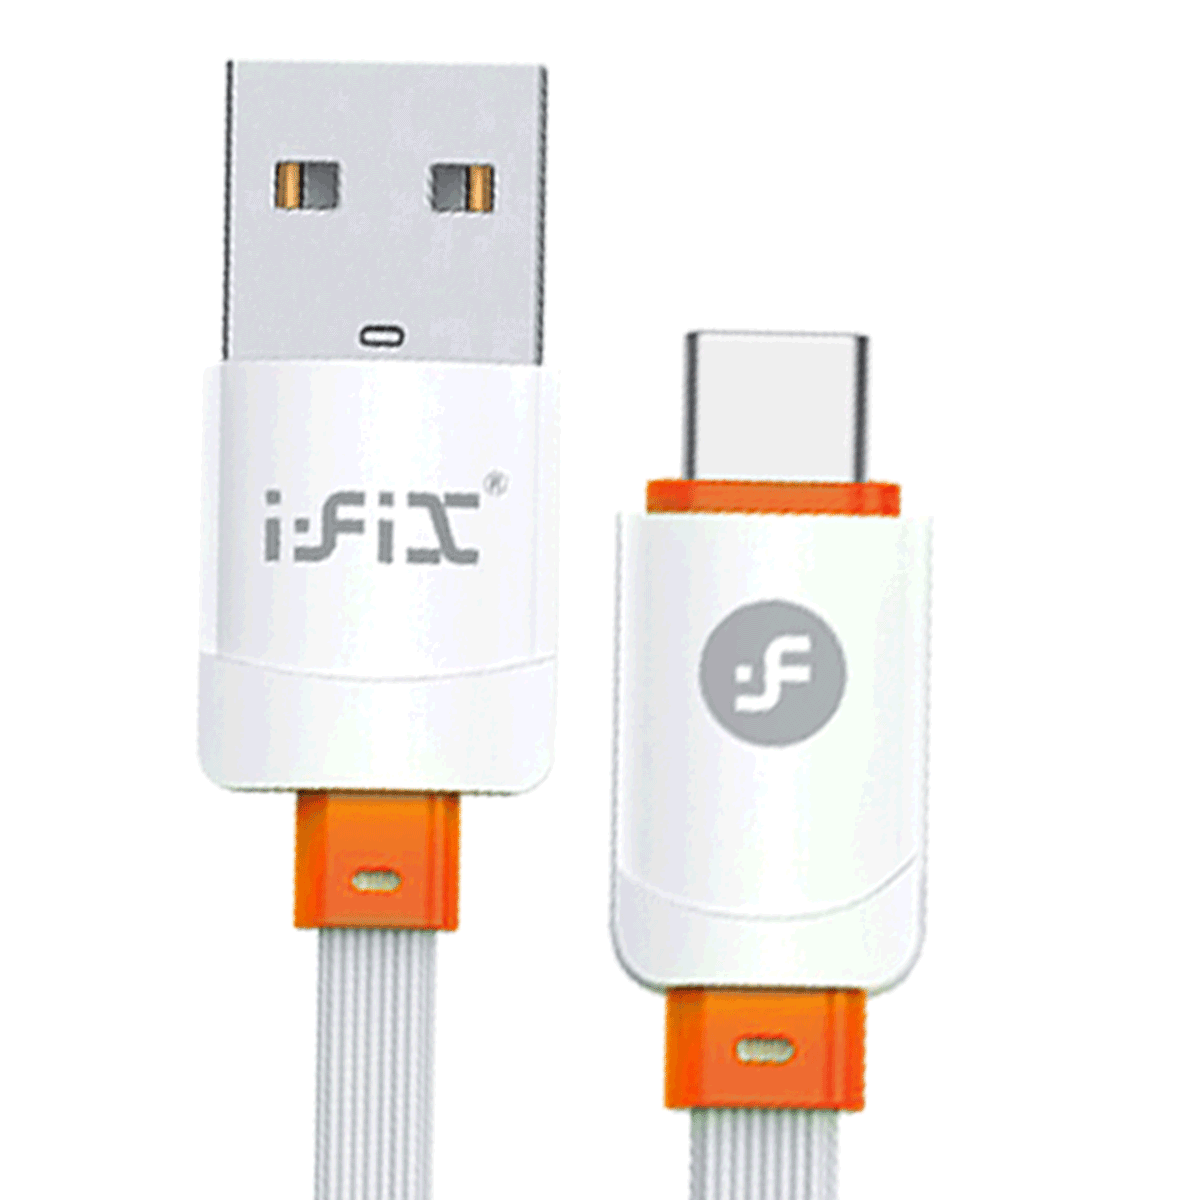 IF-02 Type-C 3.4A Fast Charging USB Data Cable( White & Red)